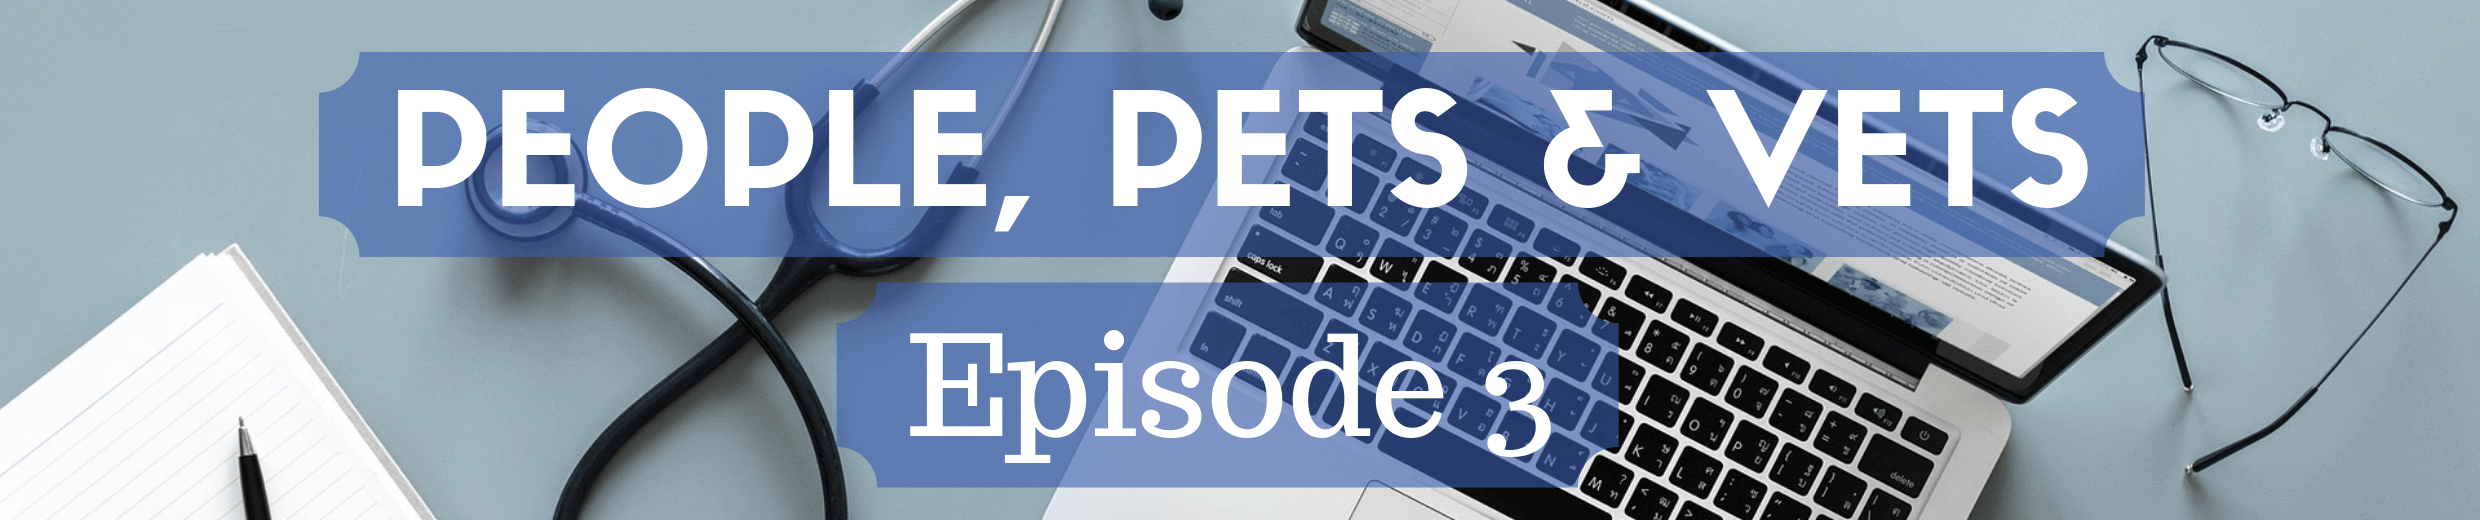 People, Pets and Vets: Episode 3 